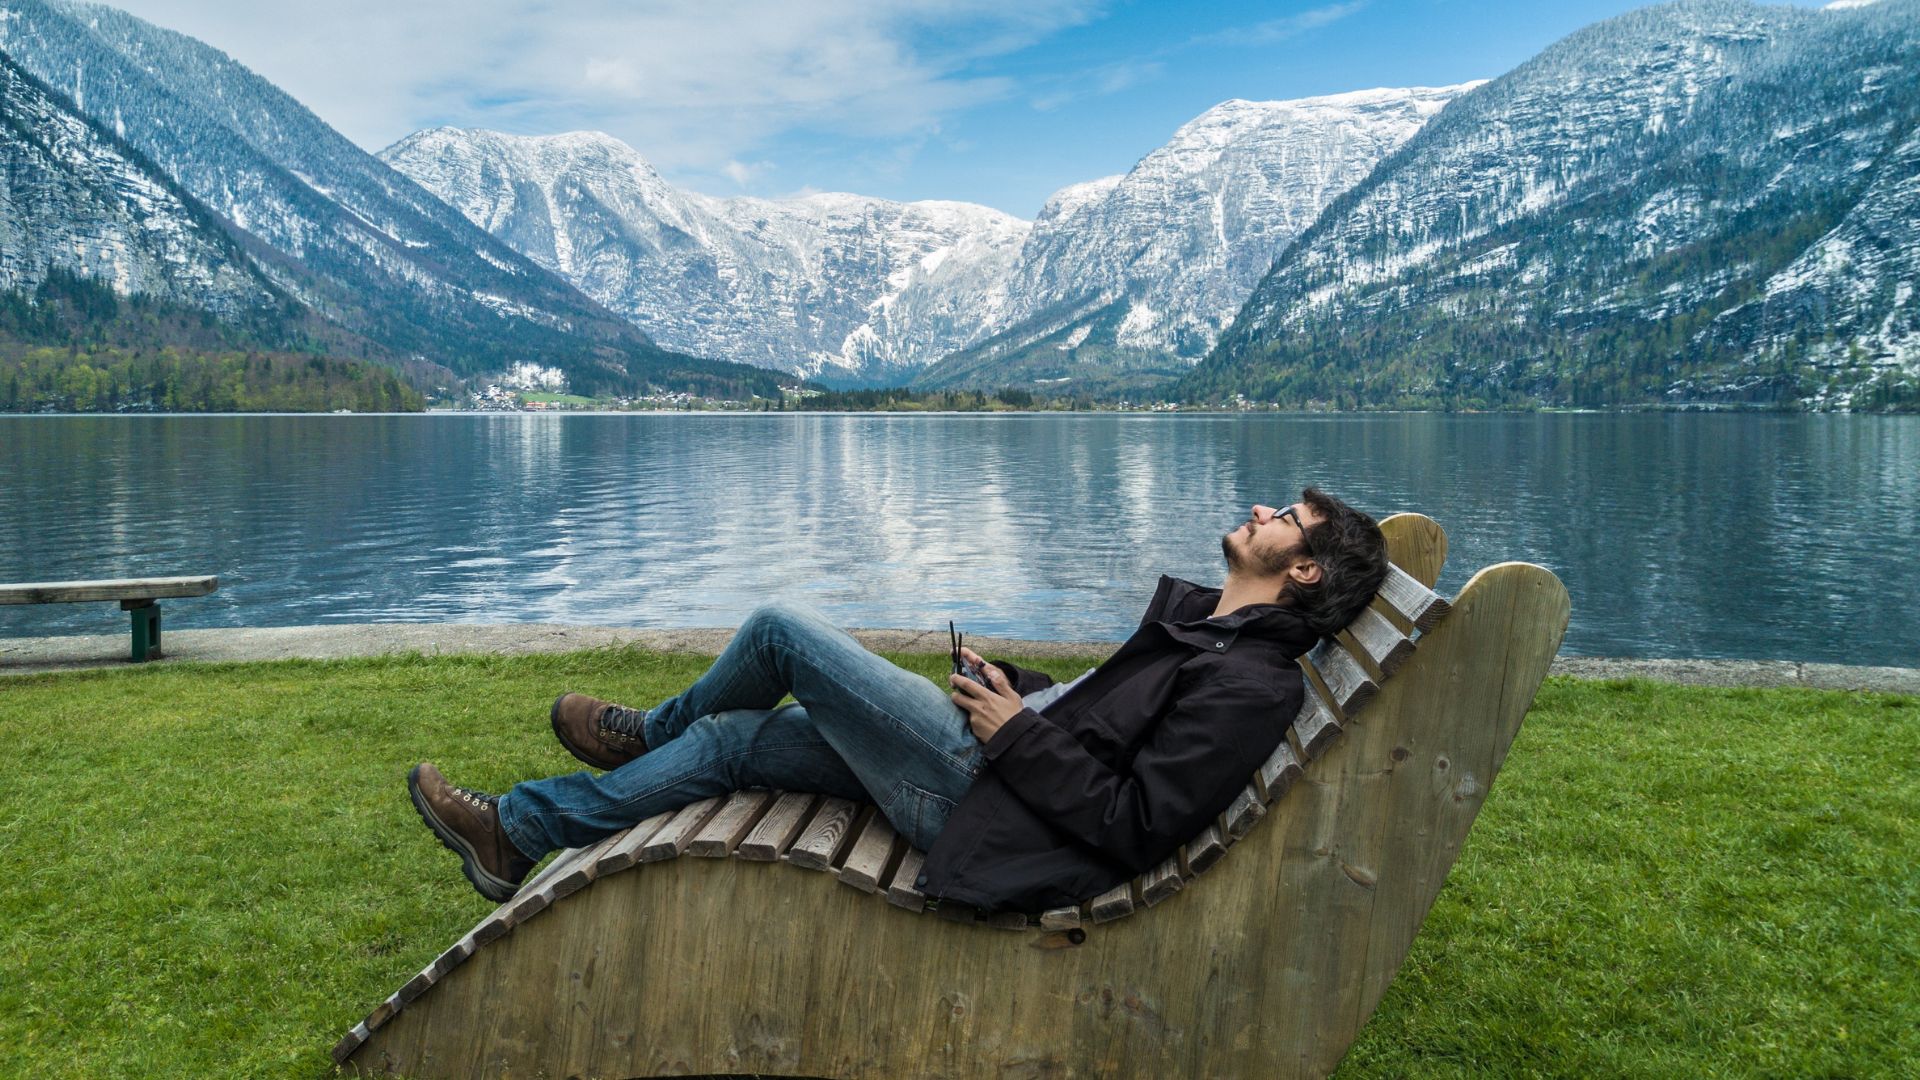 A man is sitting on a wooden chair in front of a lake.